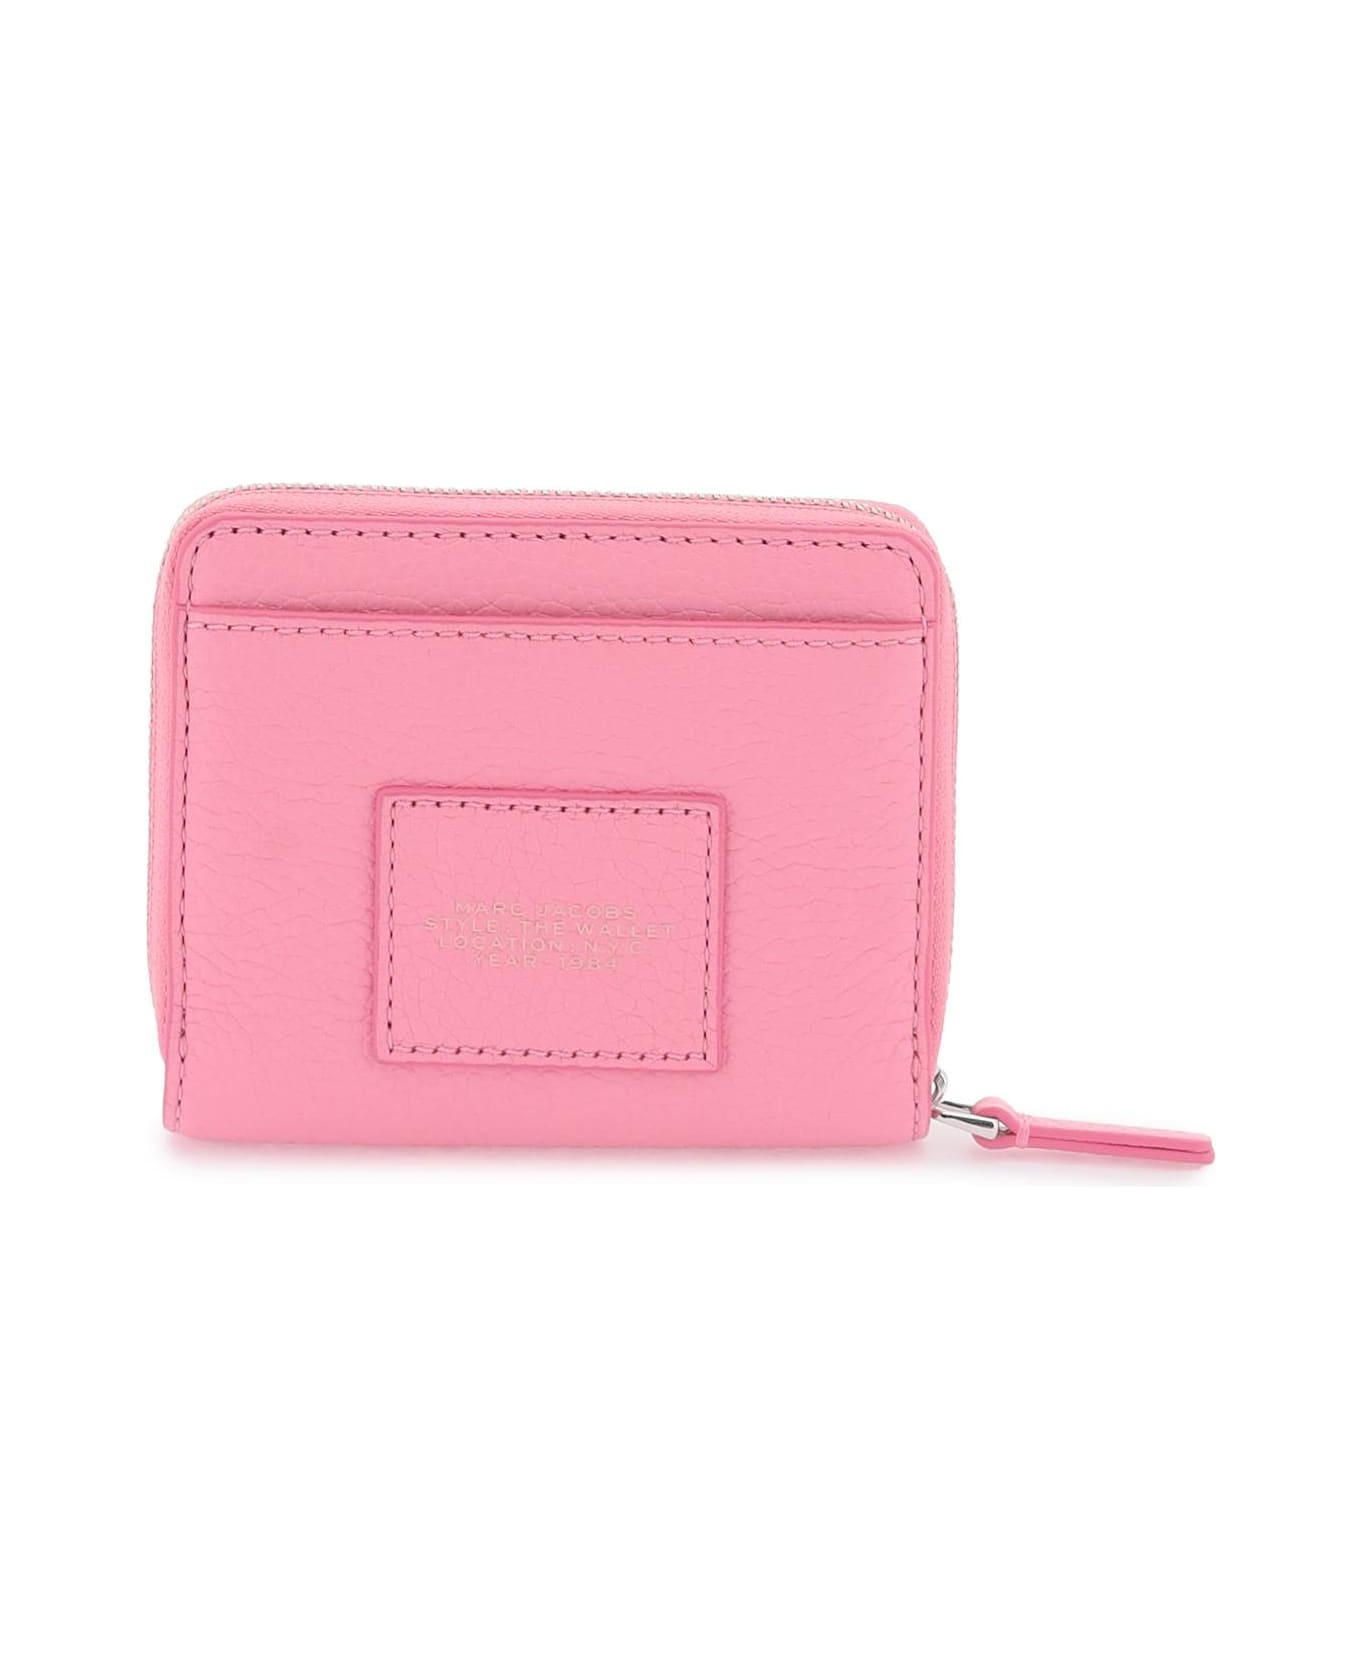 Marc Jacobs The Leather Mini Compact Wallet - PETAL PINK (Pink) 財布